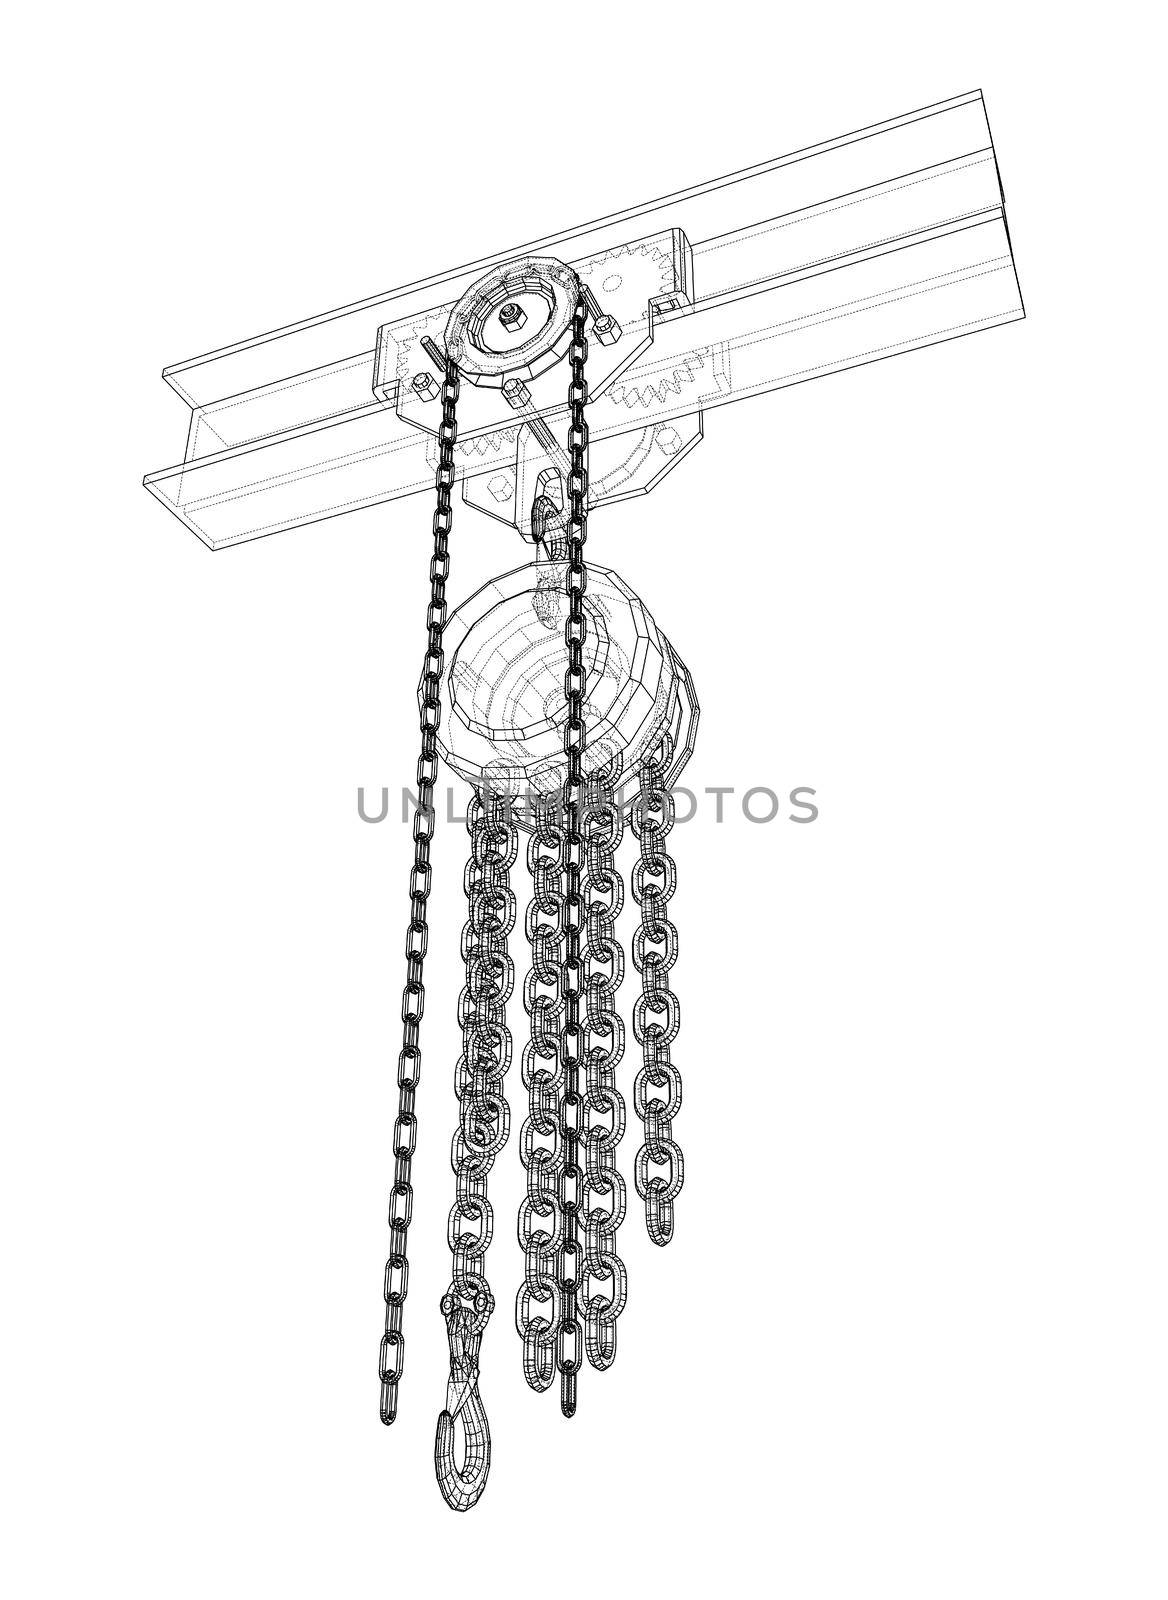 A Hoist on the beam. 3d illustration. Wire-frame style